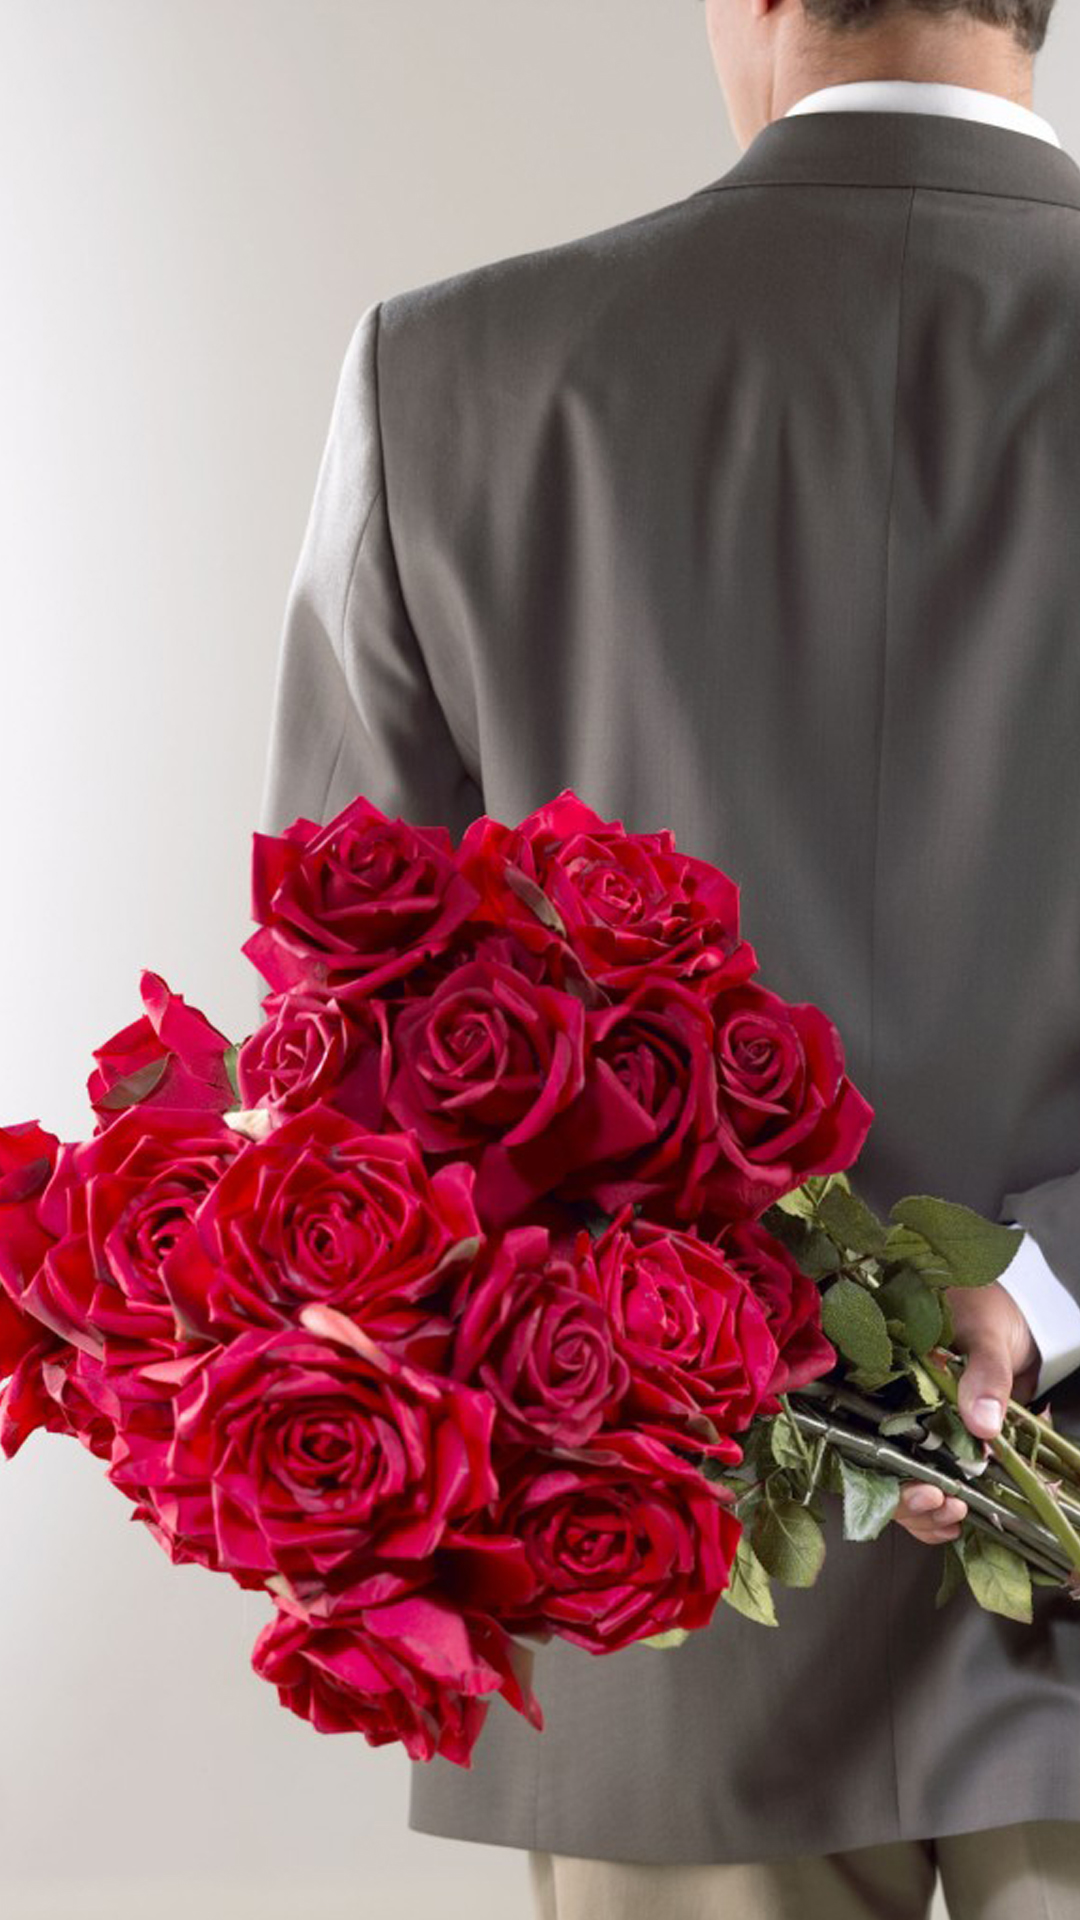 Man Holding Red Roses Bouquet - HD Wallpaper 